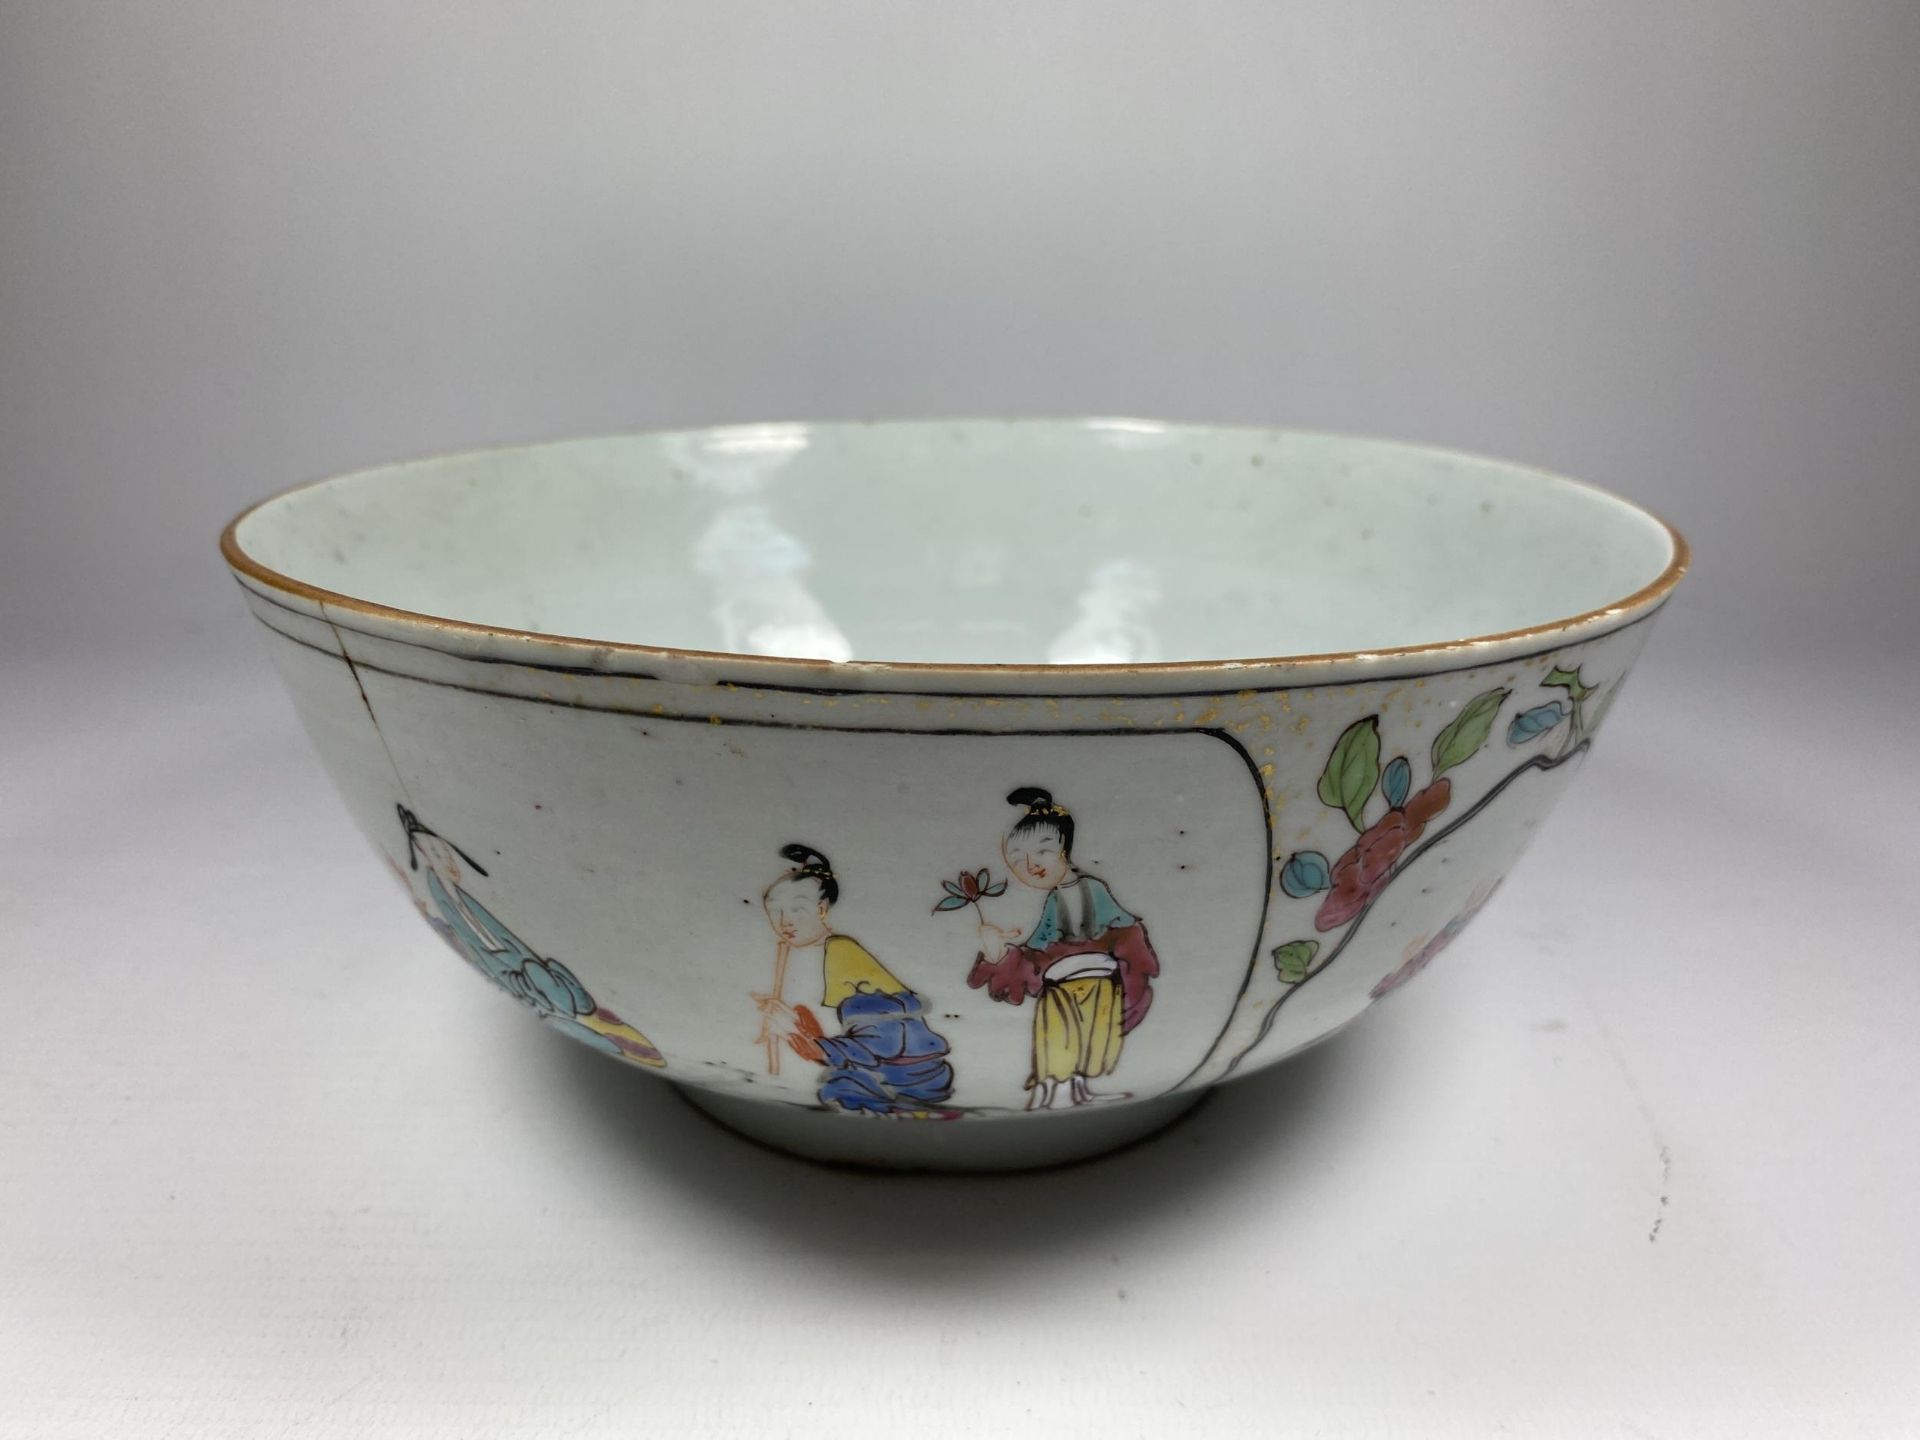 A LATE 18TH / EARLY 19TH CENTURY CHINESE PORCELAIN BOWL WITH ENAMELLED FIGURE DESIGN, DIAMETER 20CM - Image 3 of 8